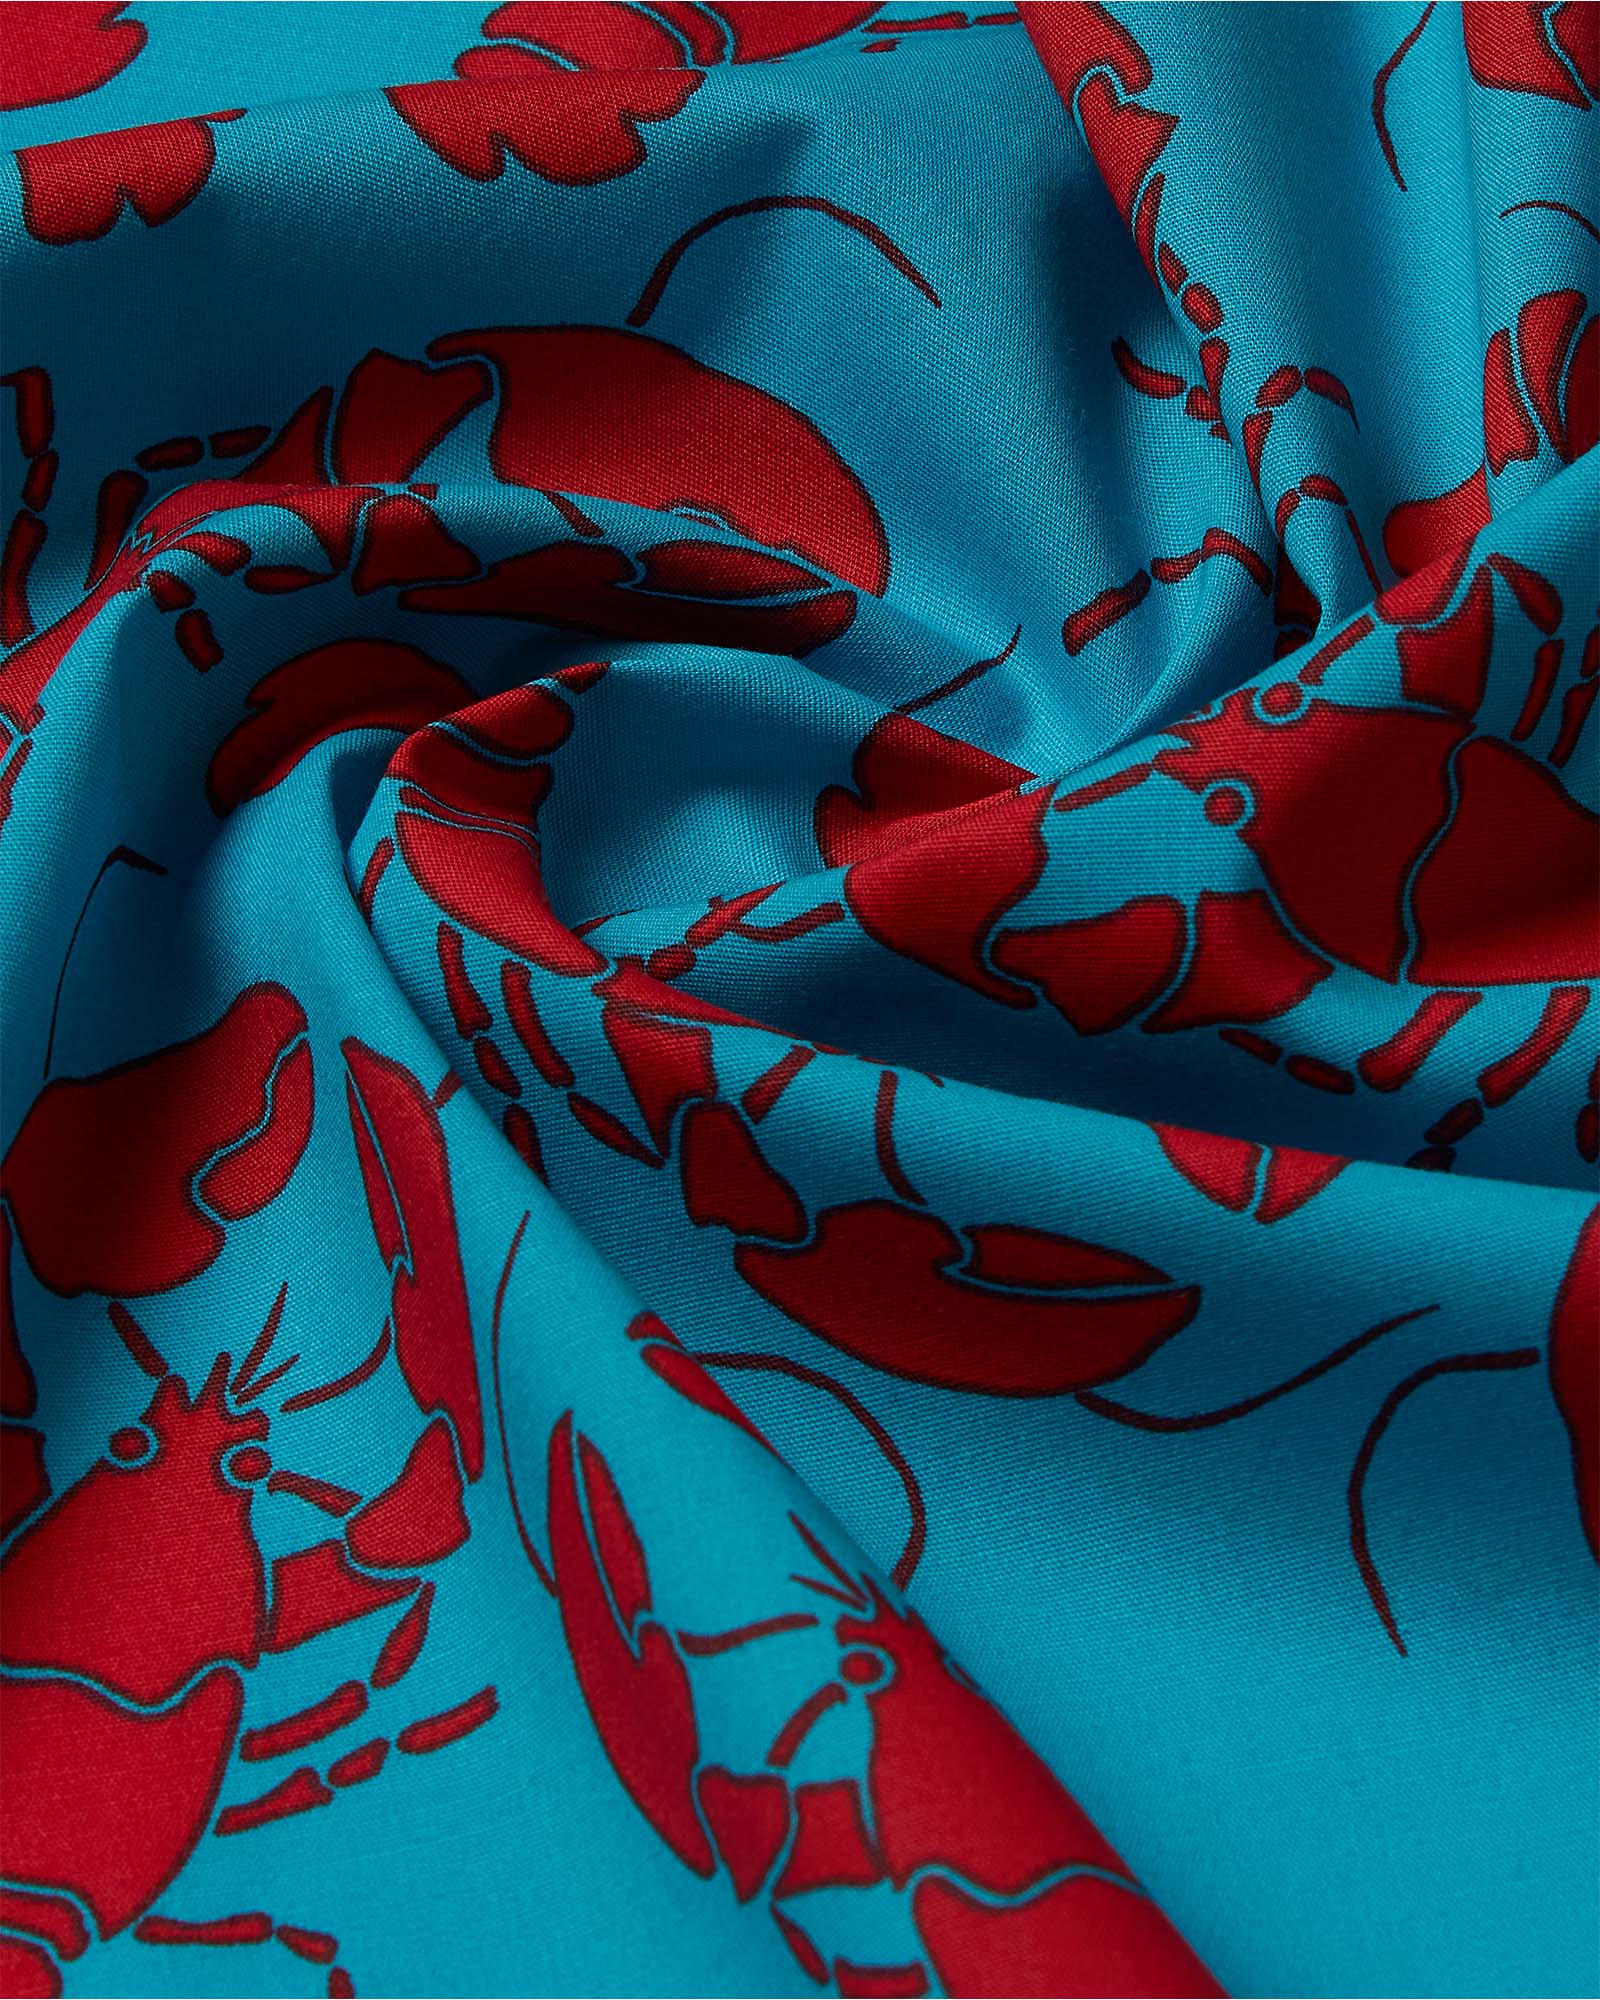 Bombay Shirt Company - Find Your Lobster Shirt